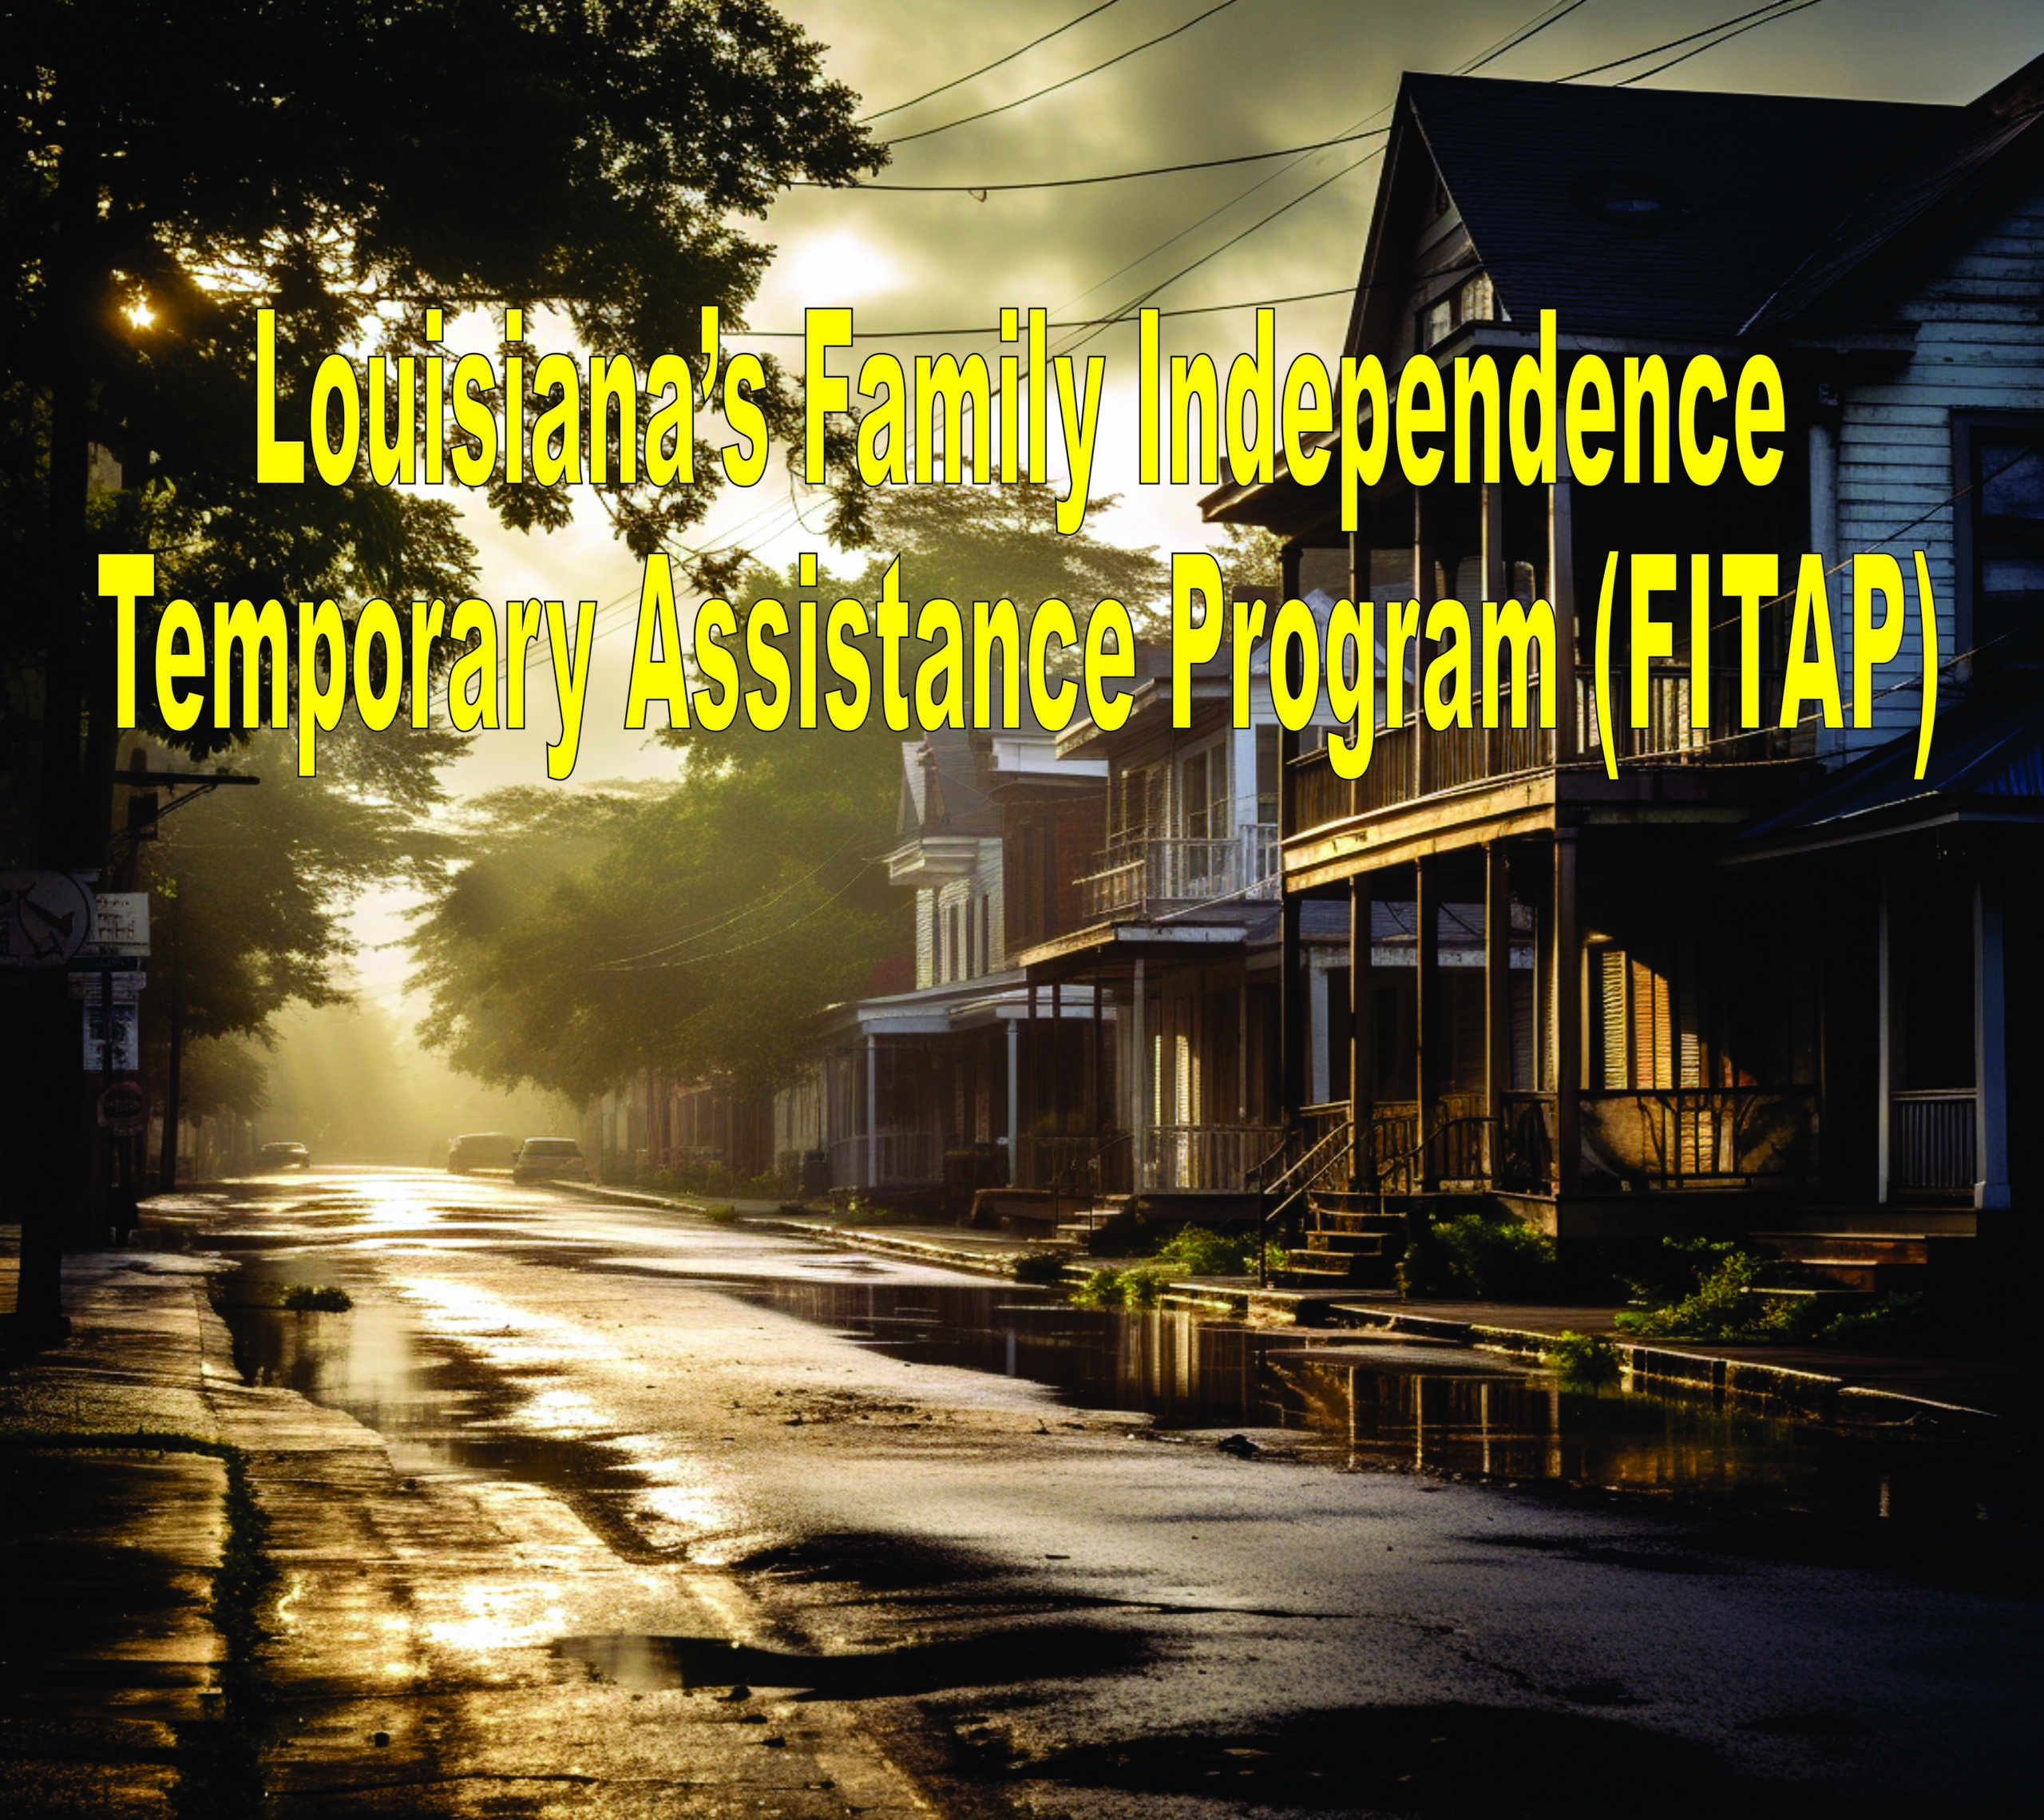 Louisiana’s Family Independence Temporary Assistance Program (fitap)